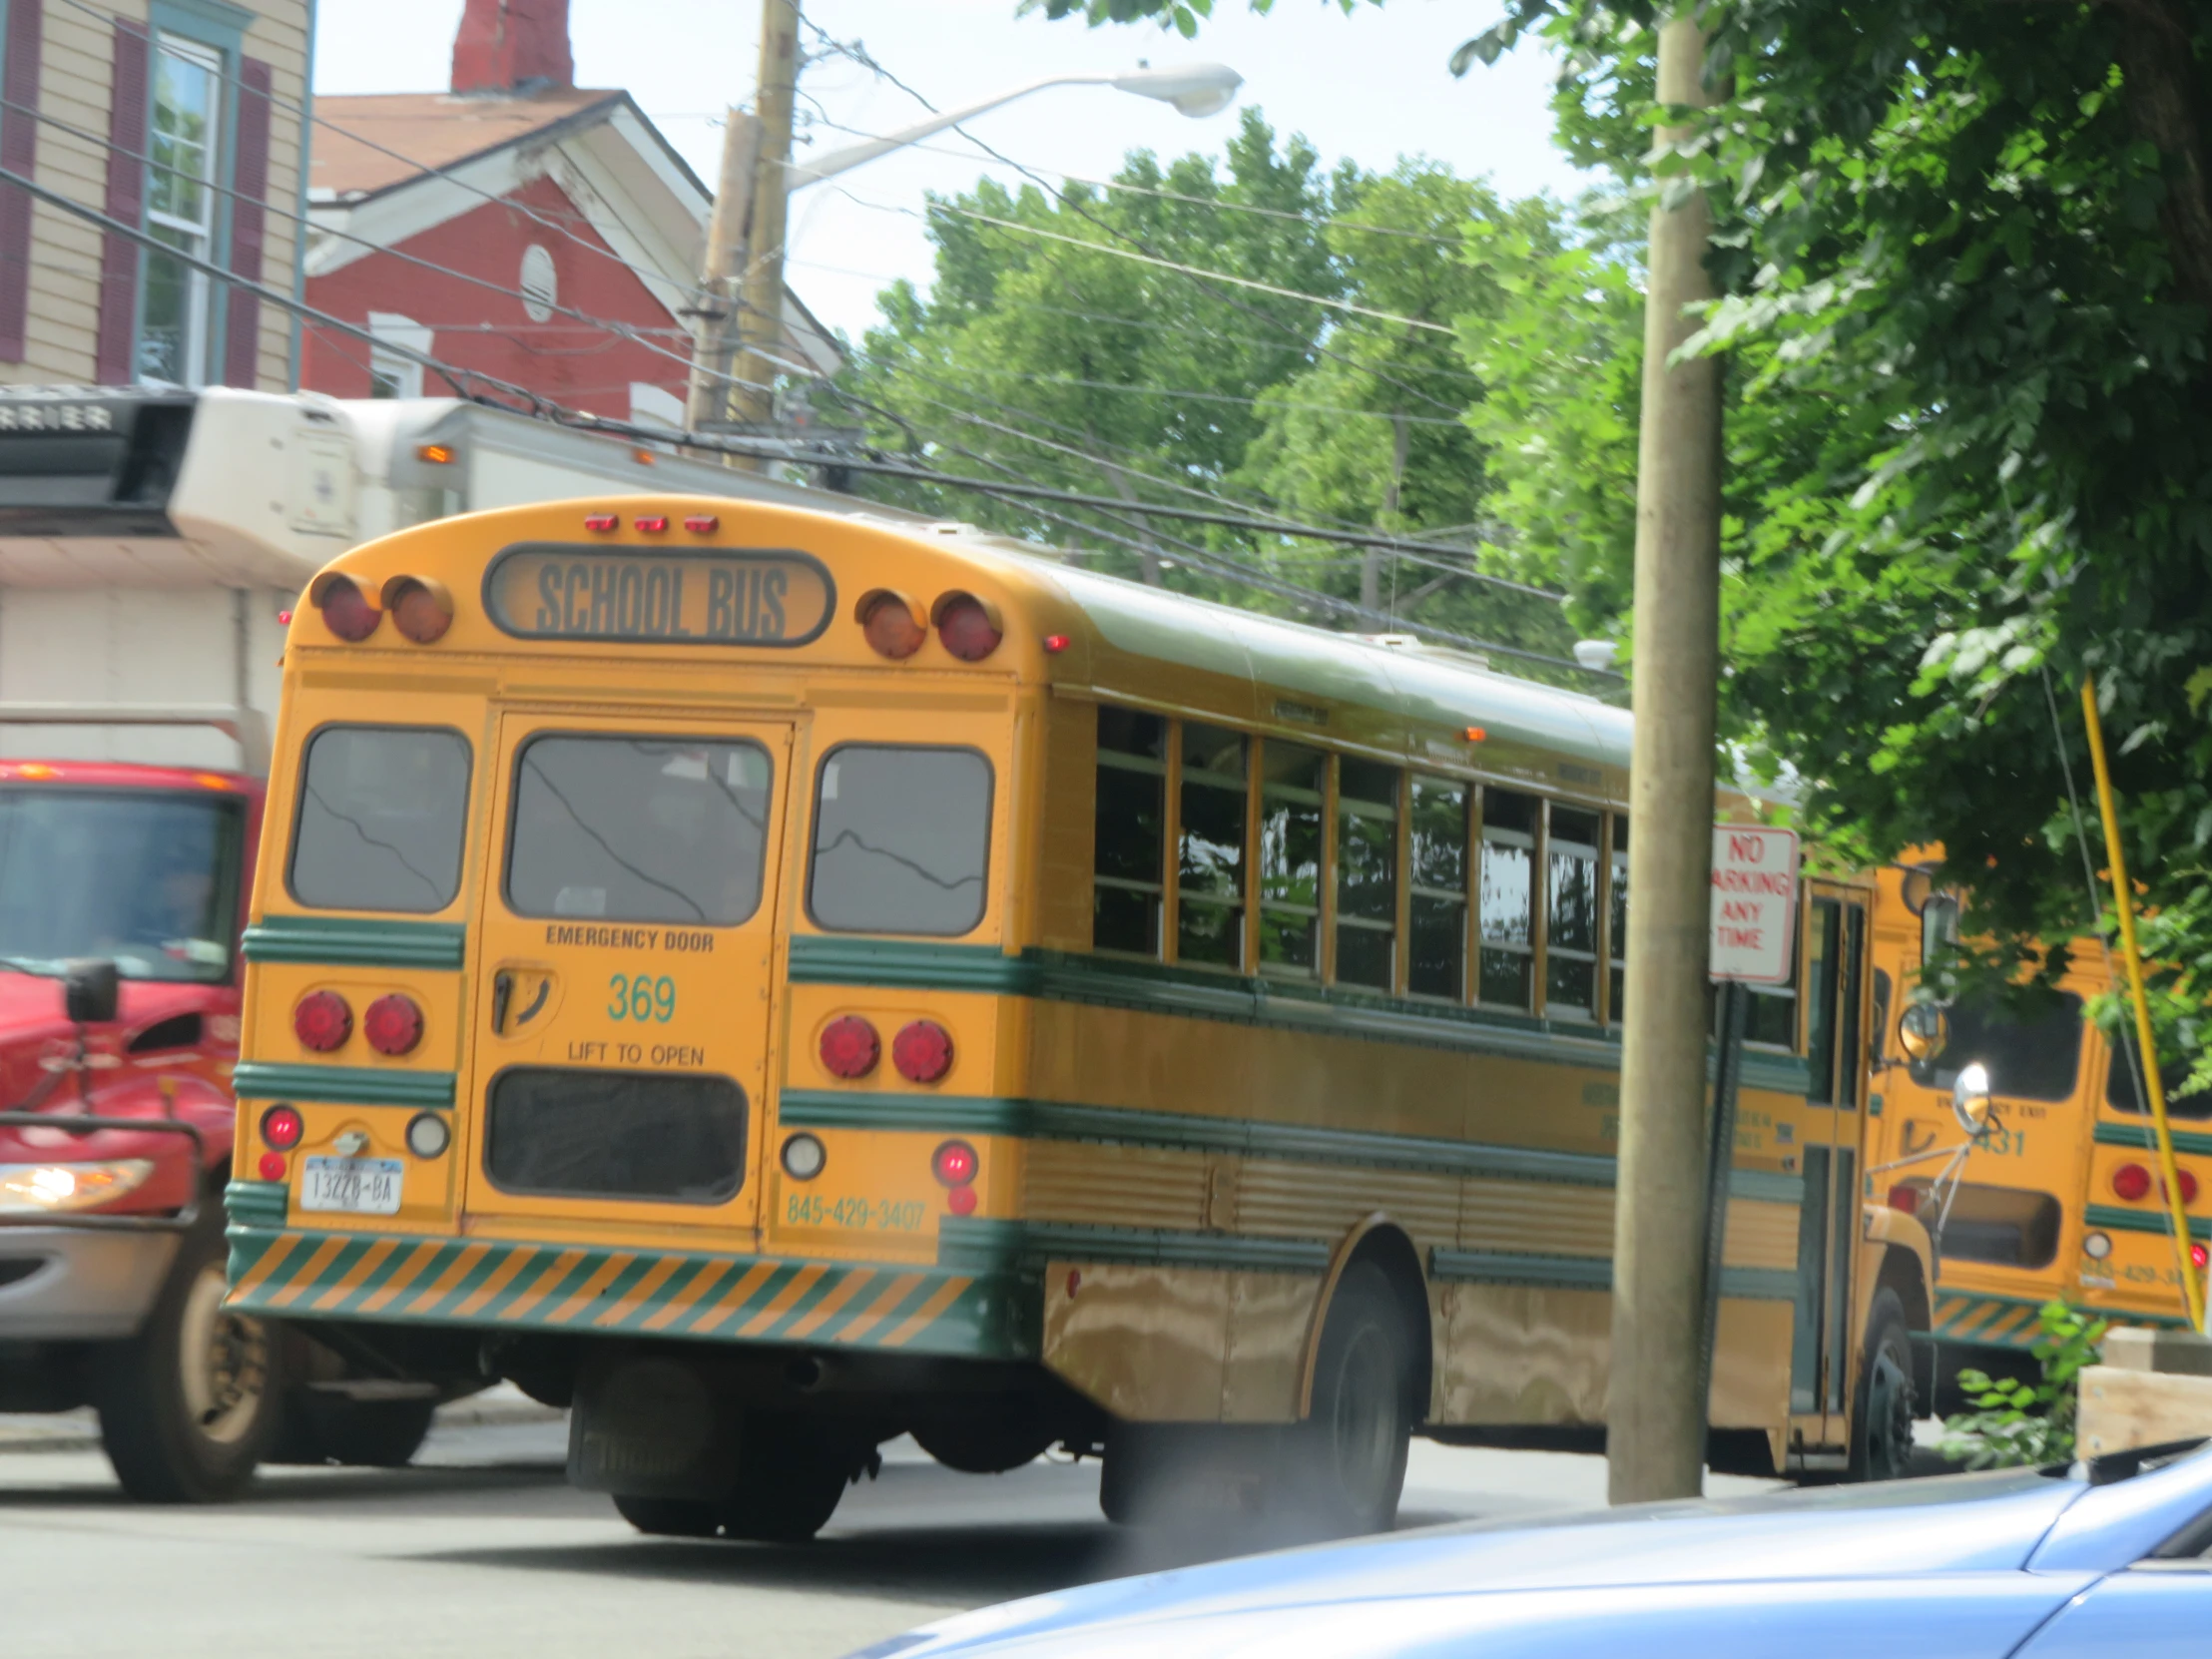 two school buses stopped at a bus stop